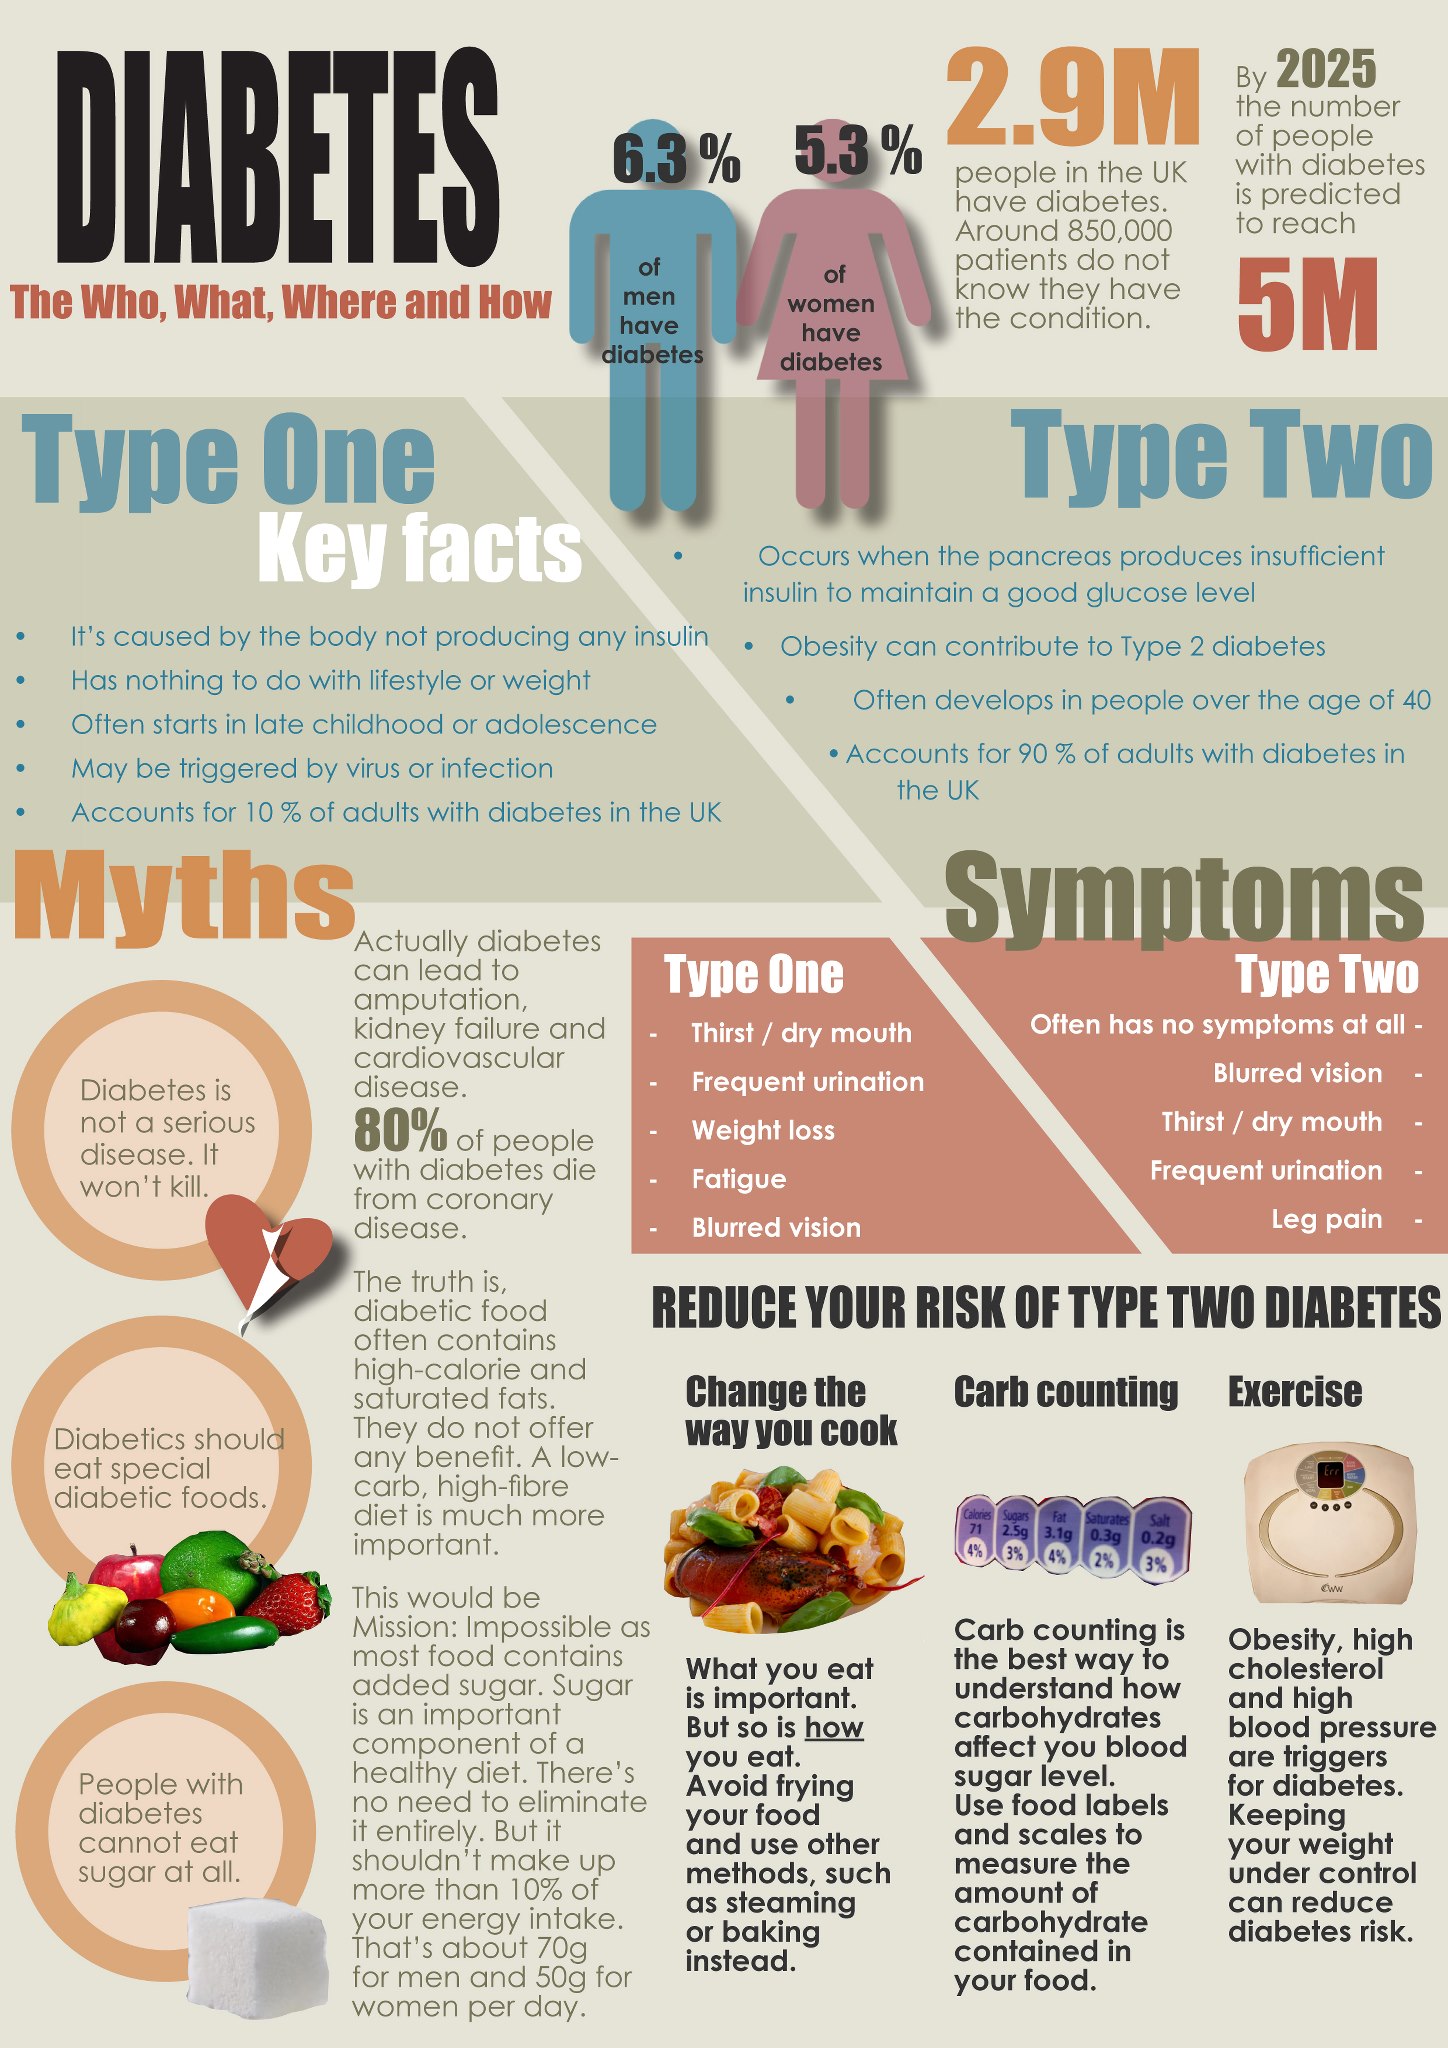 why does type 1 diabetes cause weight loss